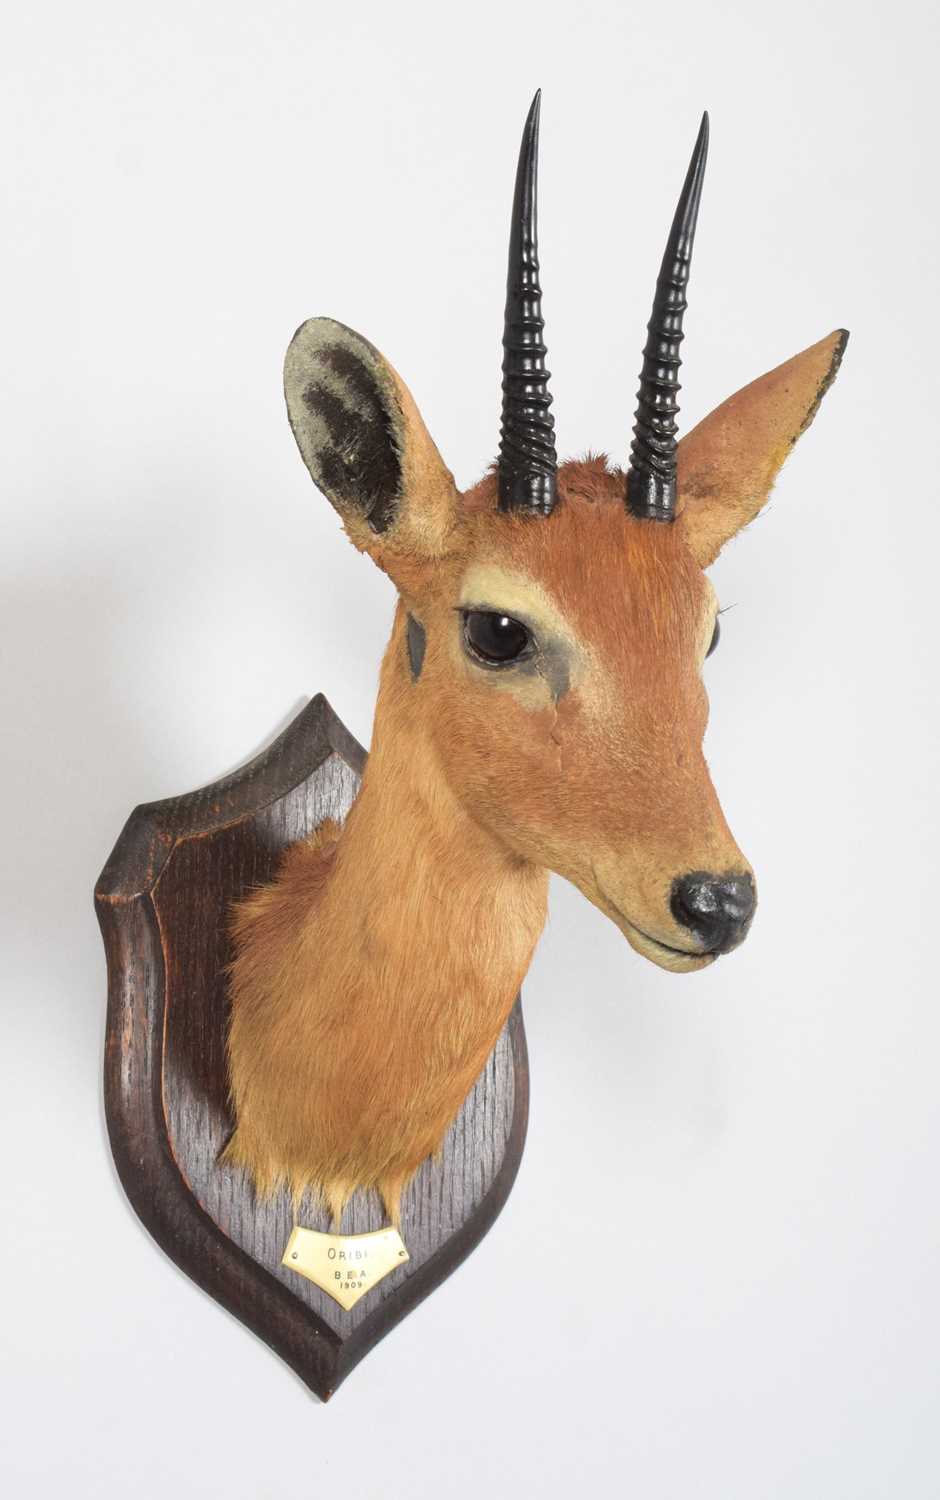 Taxidermy: Central Oribi (Ourebia hastata), dated 1909, British East Africa, by Rowland Ward Ltd, " - Image 3 of 5